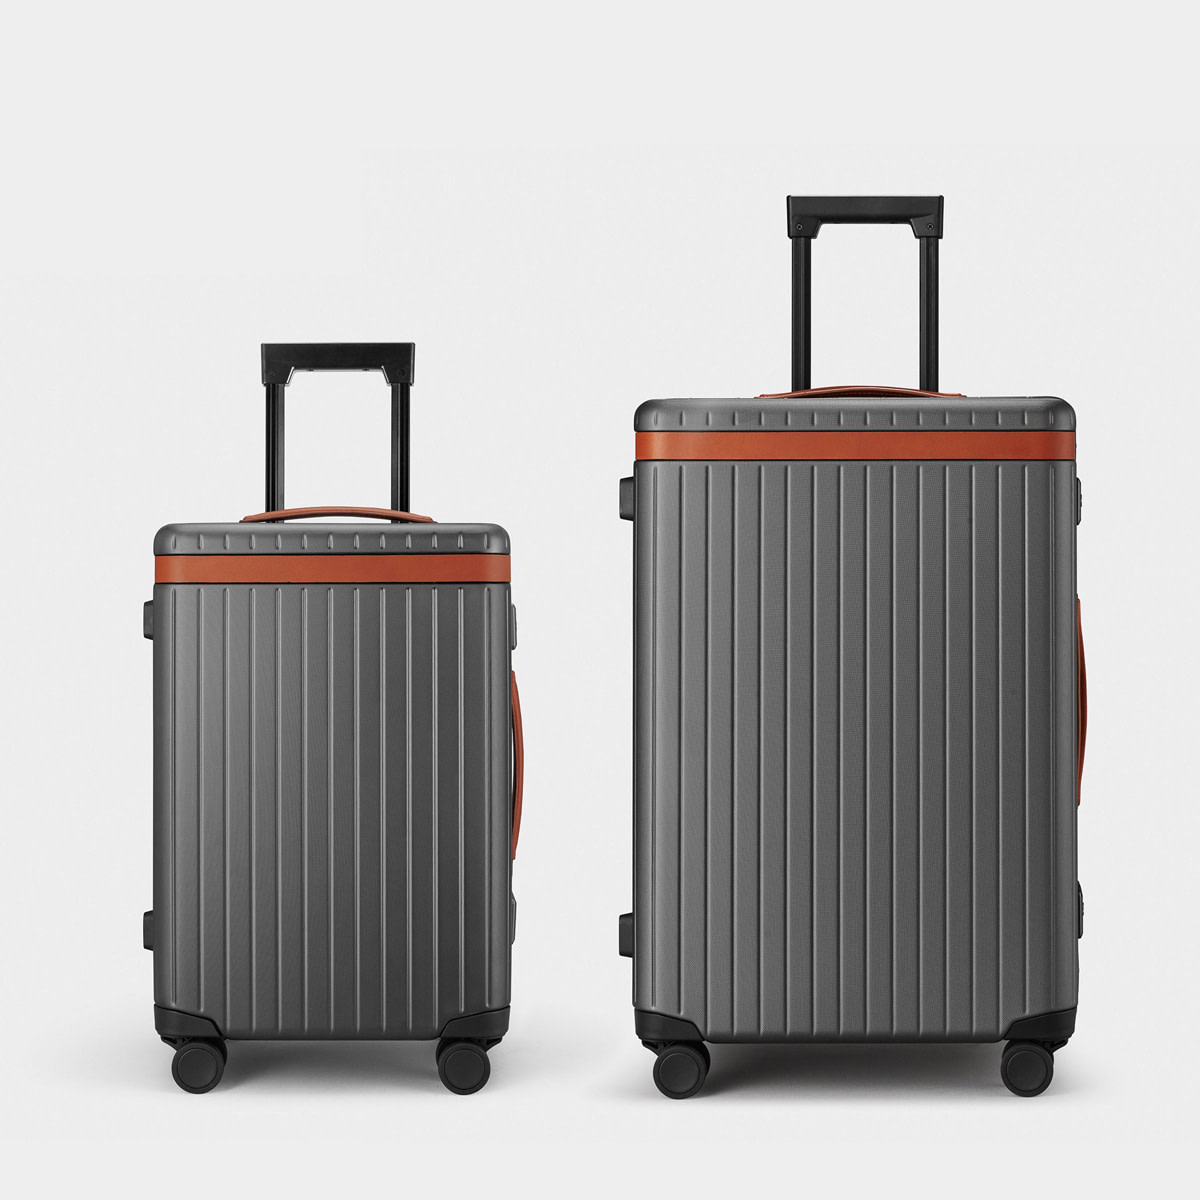 Best Luggage Set for Business Travel